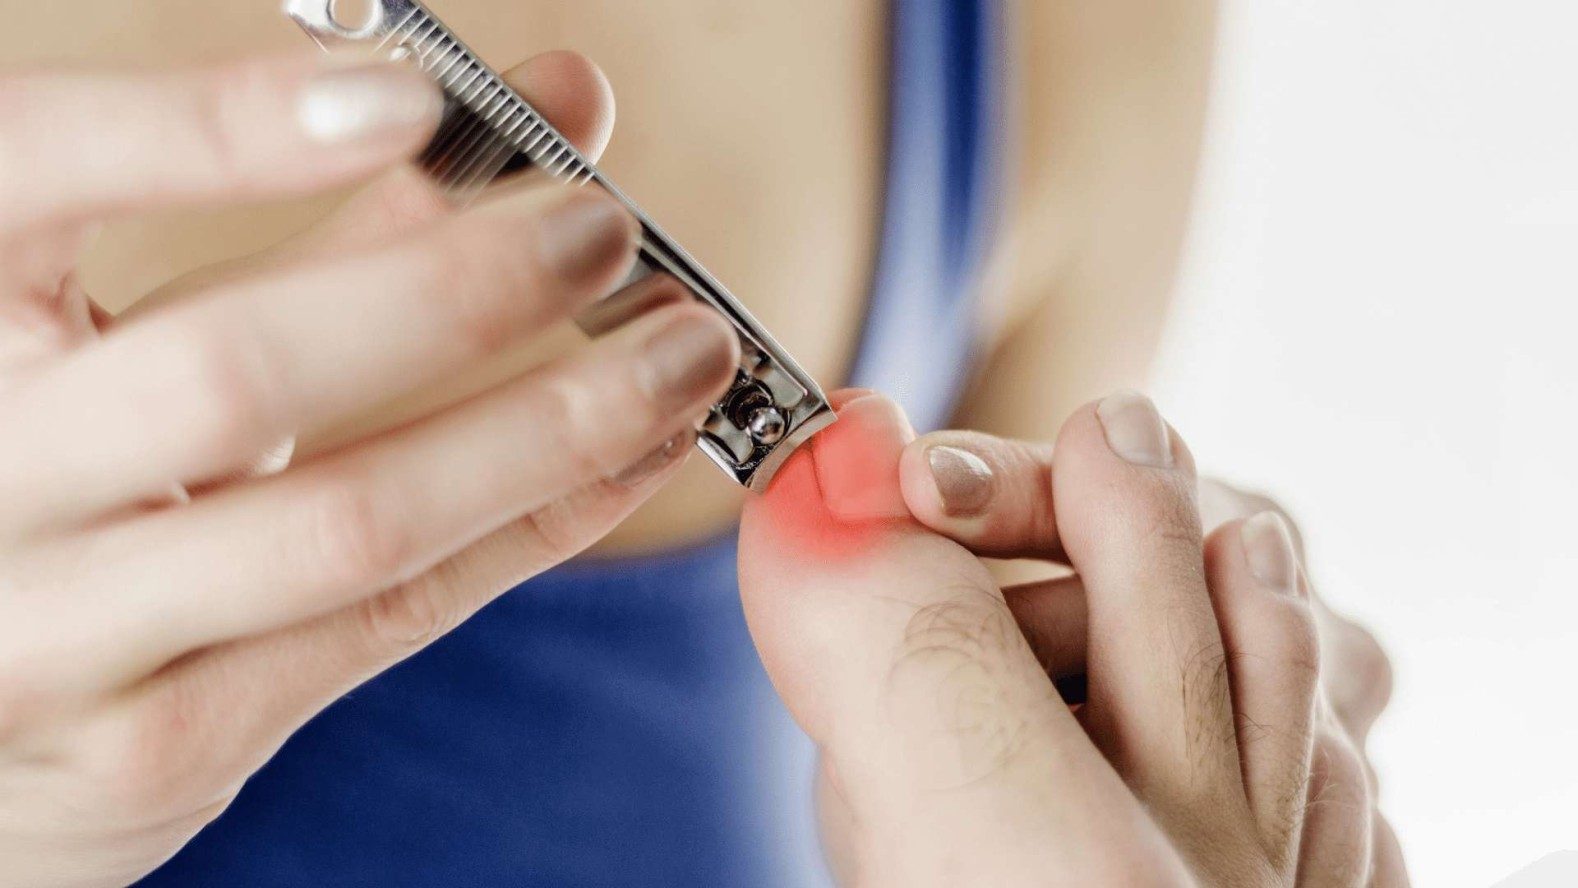 What Is an Ingrown Nail and How Should It Be Treated? - GoodRx